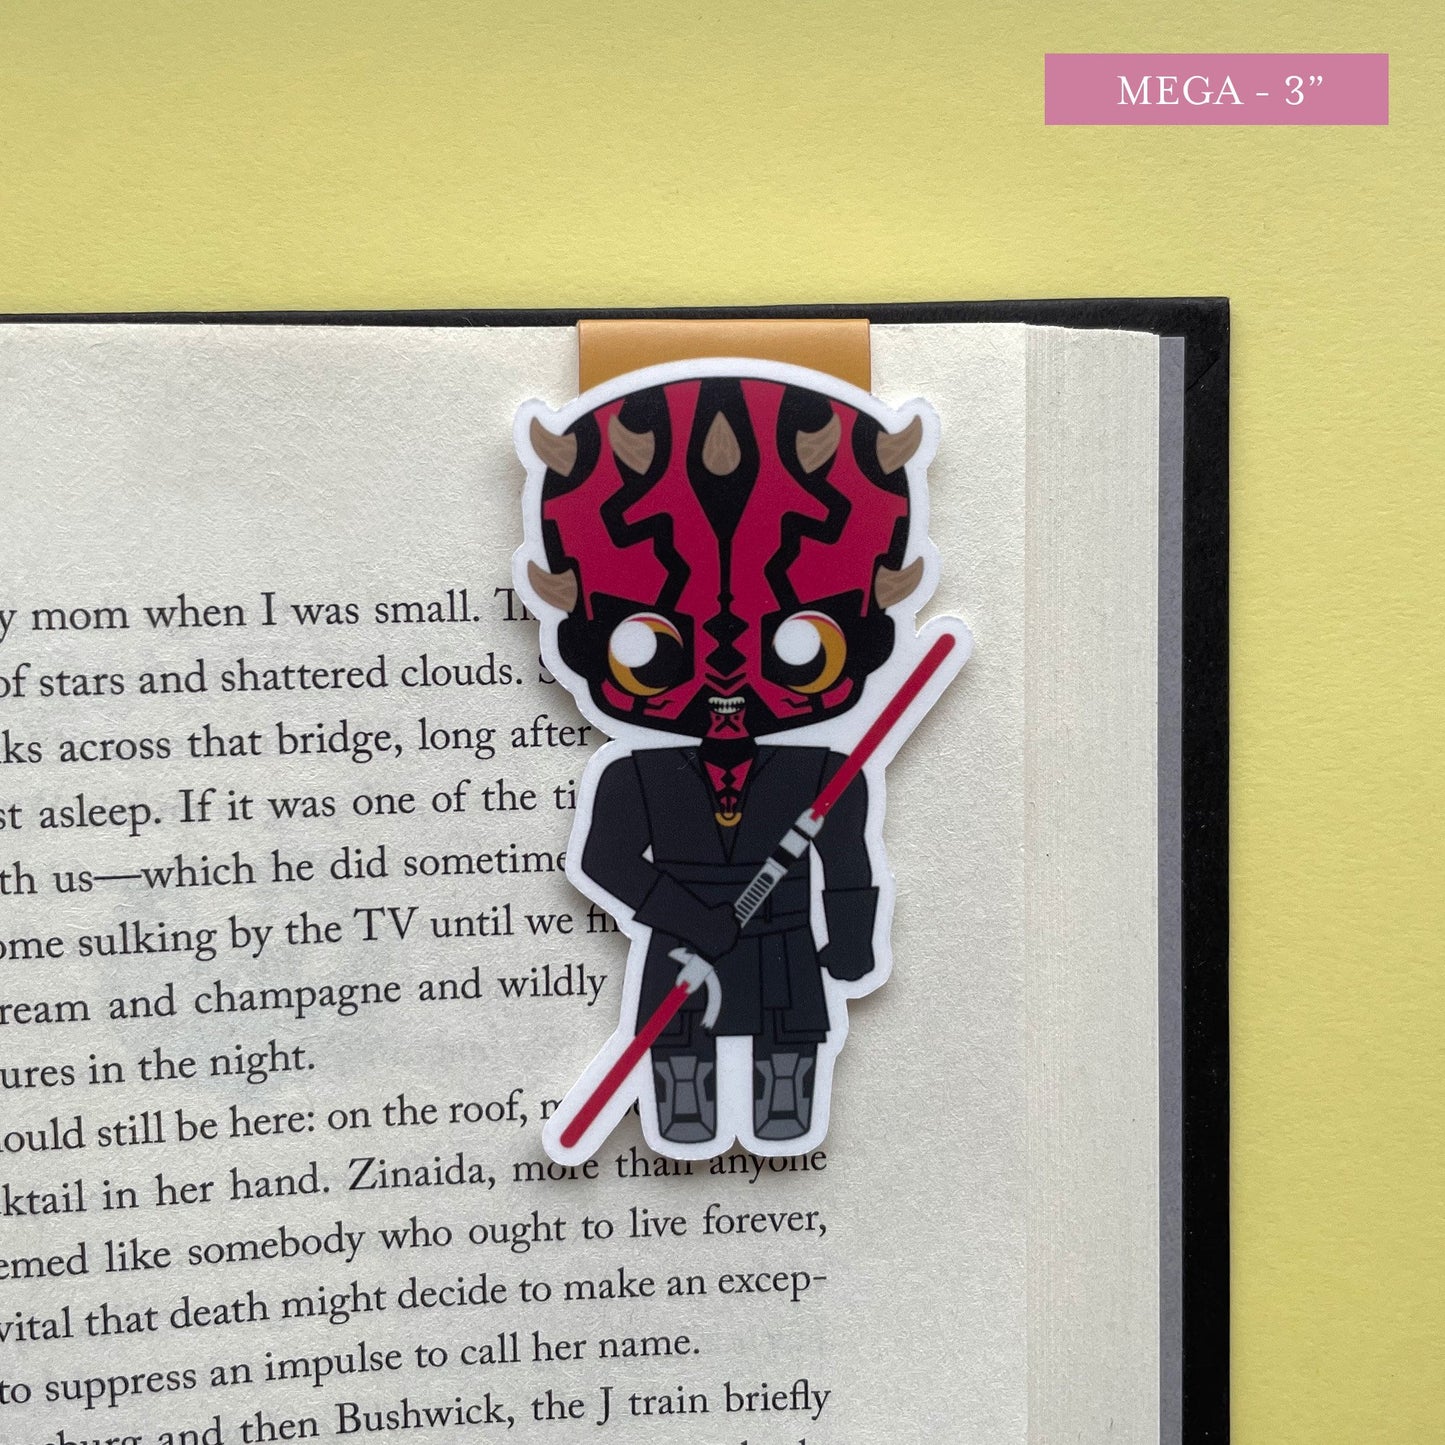 Space Wizards Crimson Dawn "Maul" Magnetic Bookmark